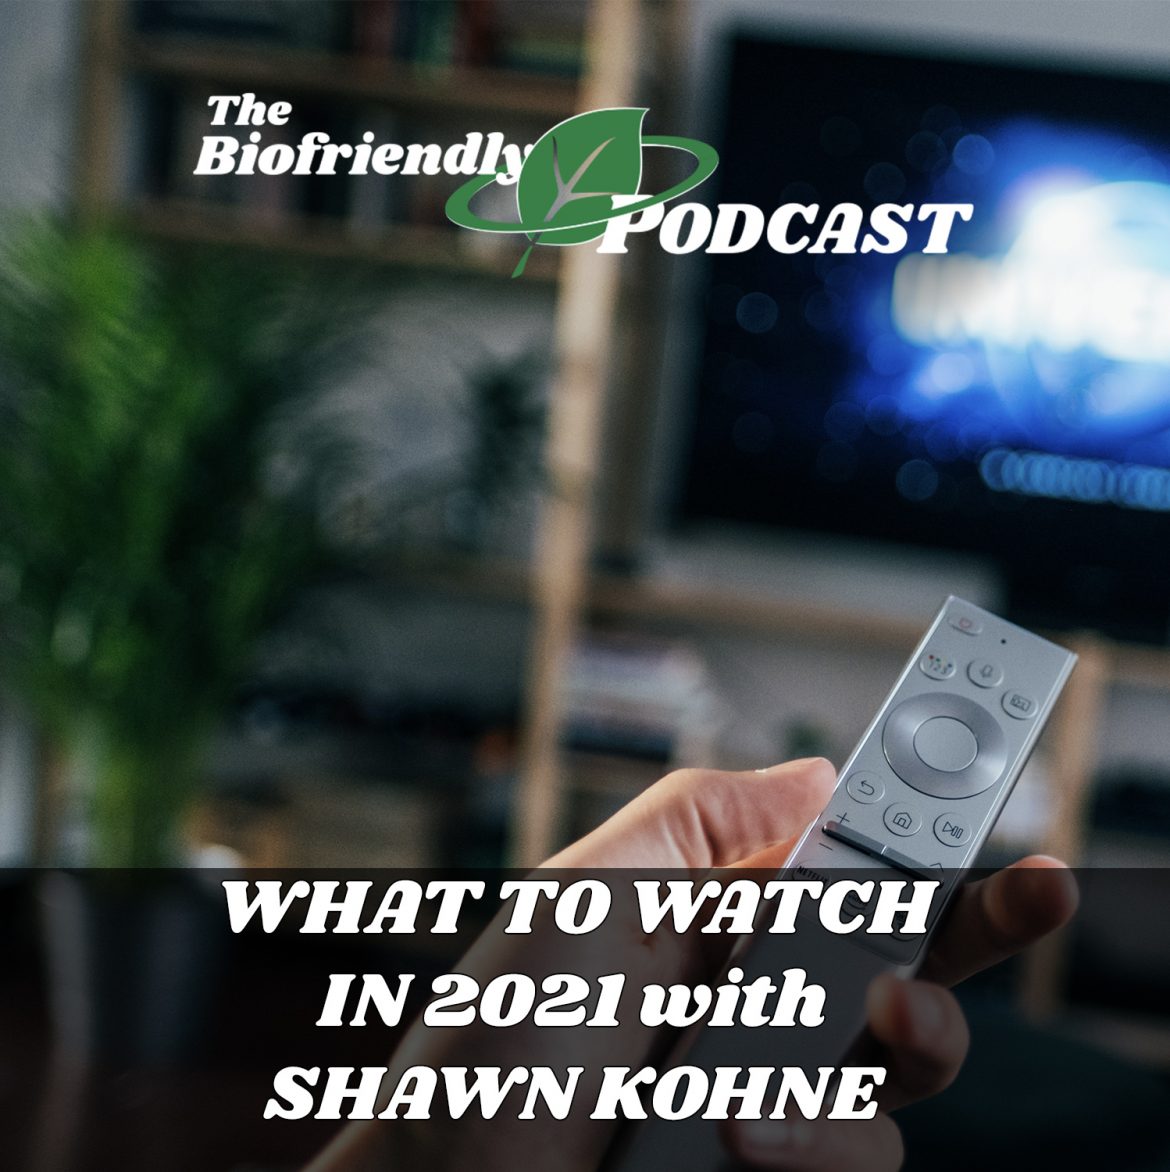 What to Watch in 2021 with Shawn Kohne